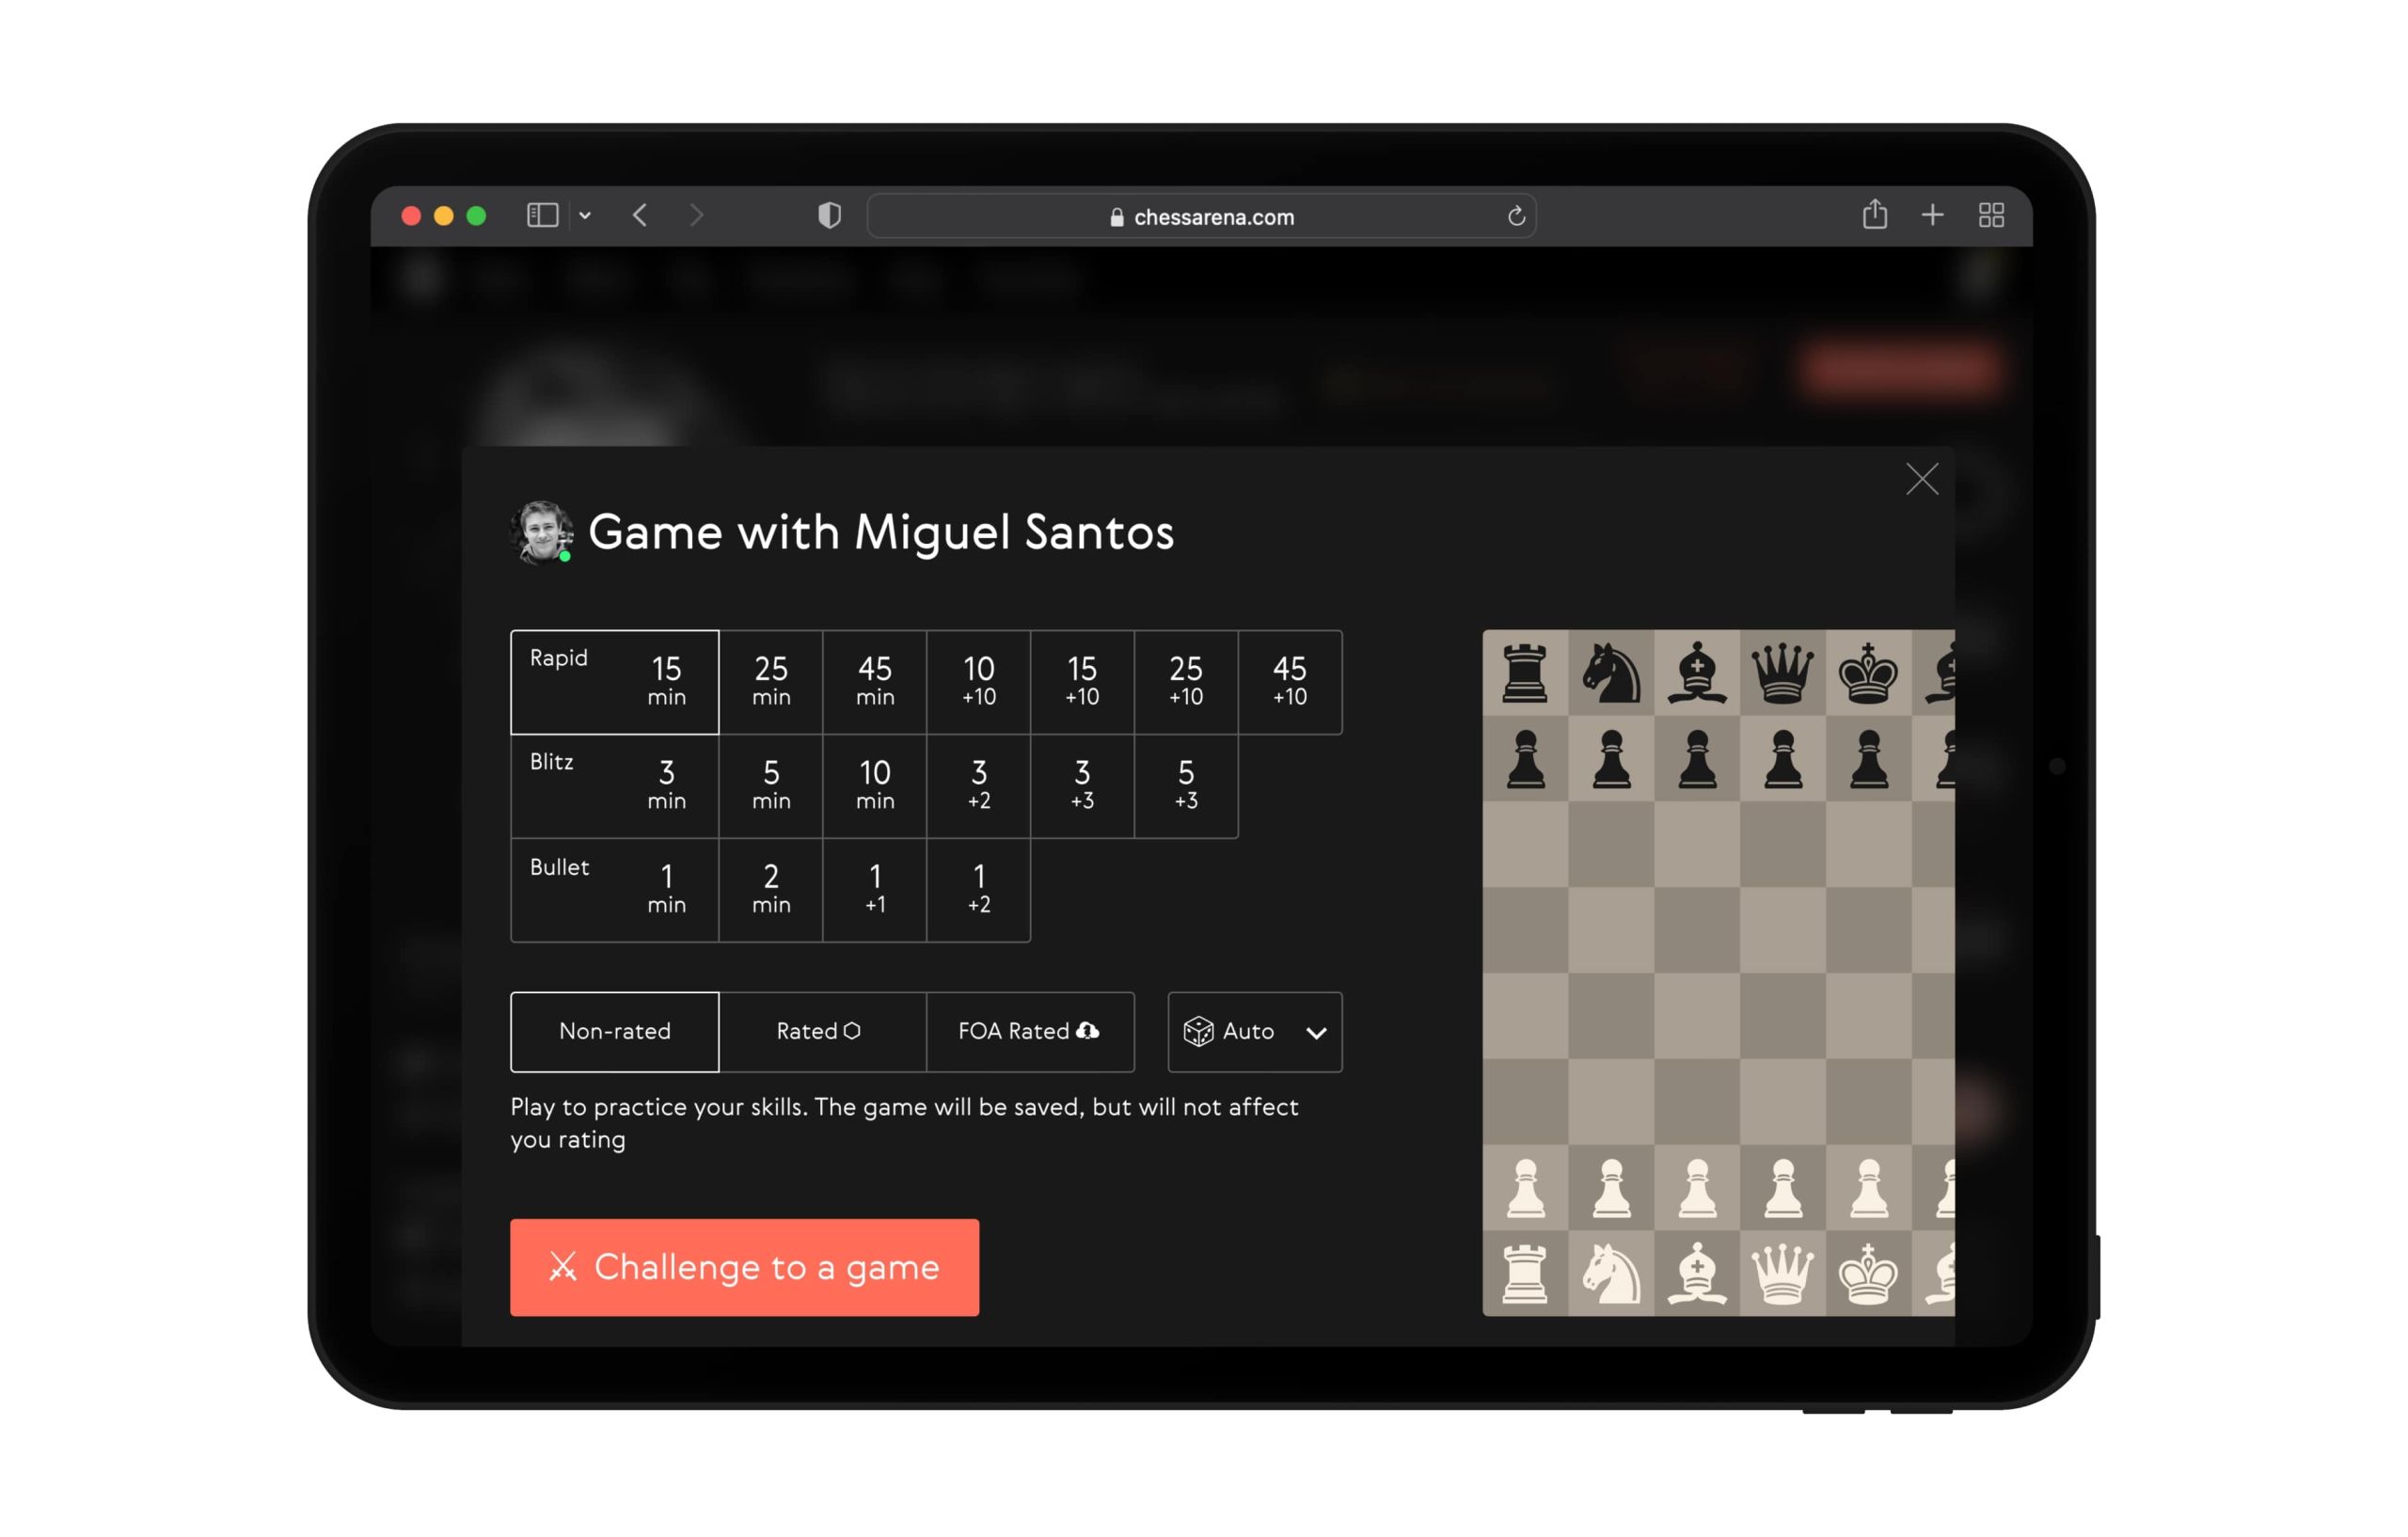 Play Chess: FIDE Online Arena  App Price Intelligence by Qonversion